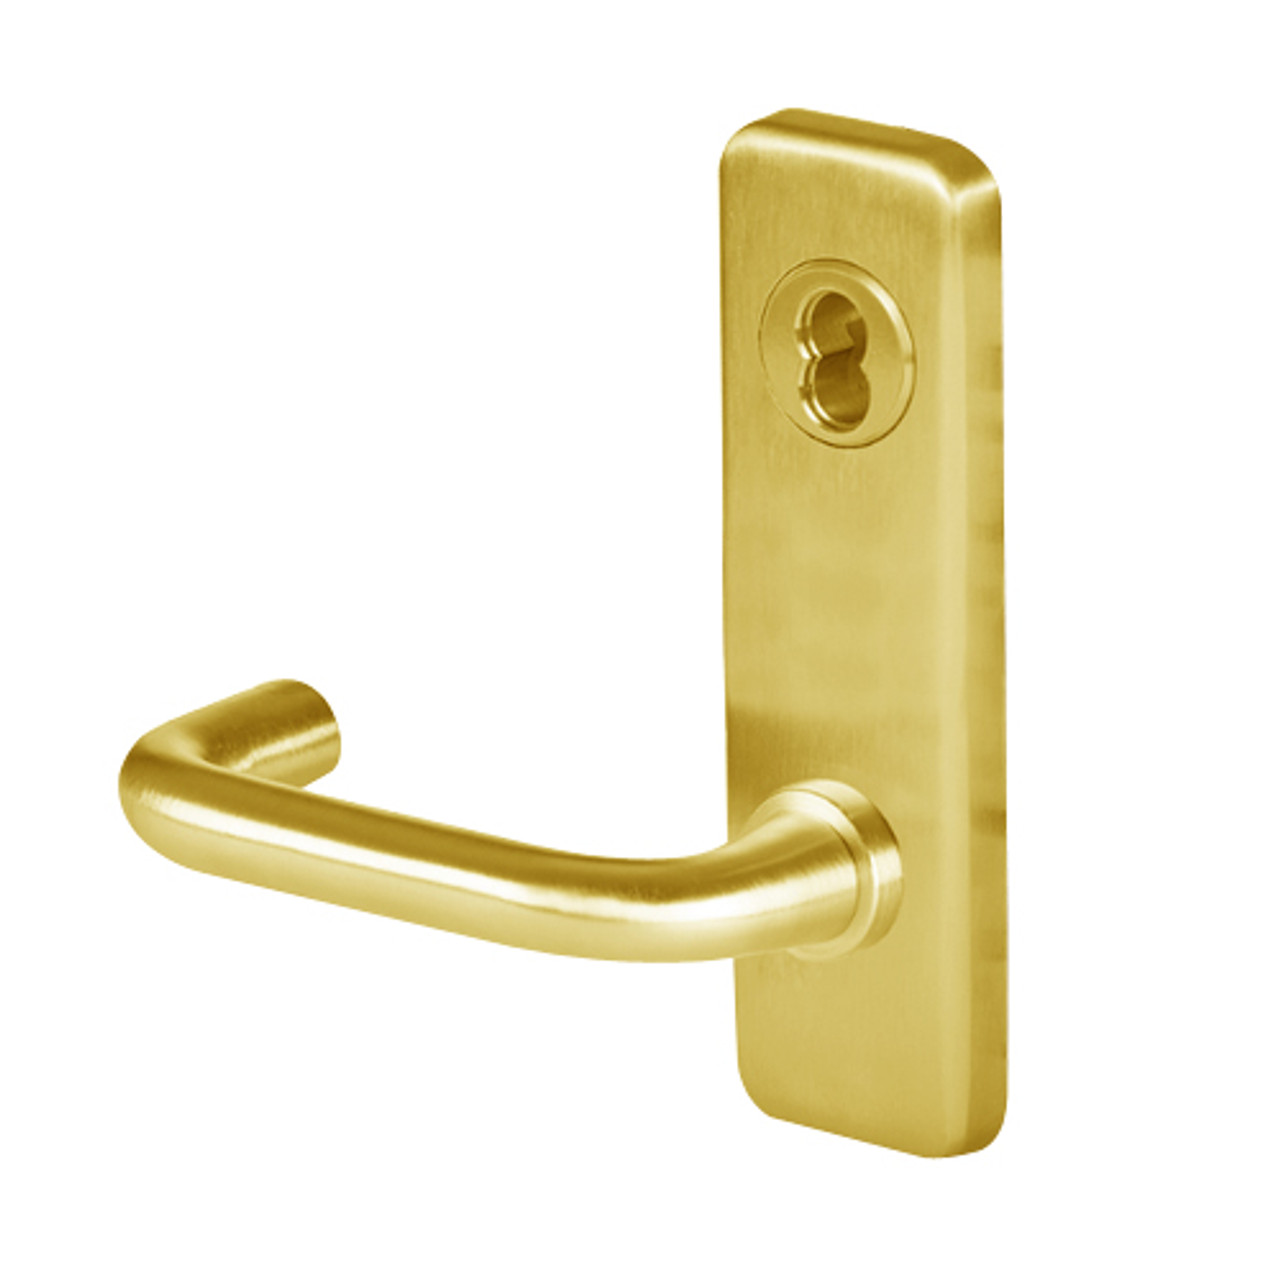 45H0N3J605 Best 40H Series Passage Heavy Duty Mortise Lever Lock with Solid Tube Return Style in Bright Brass